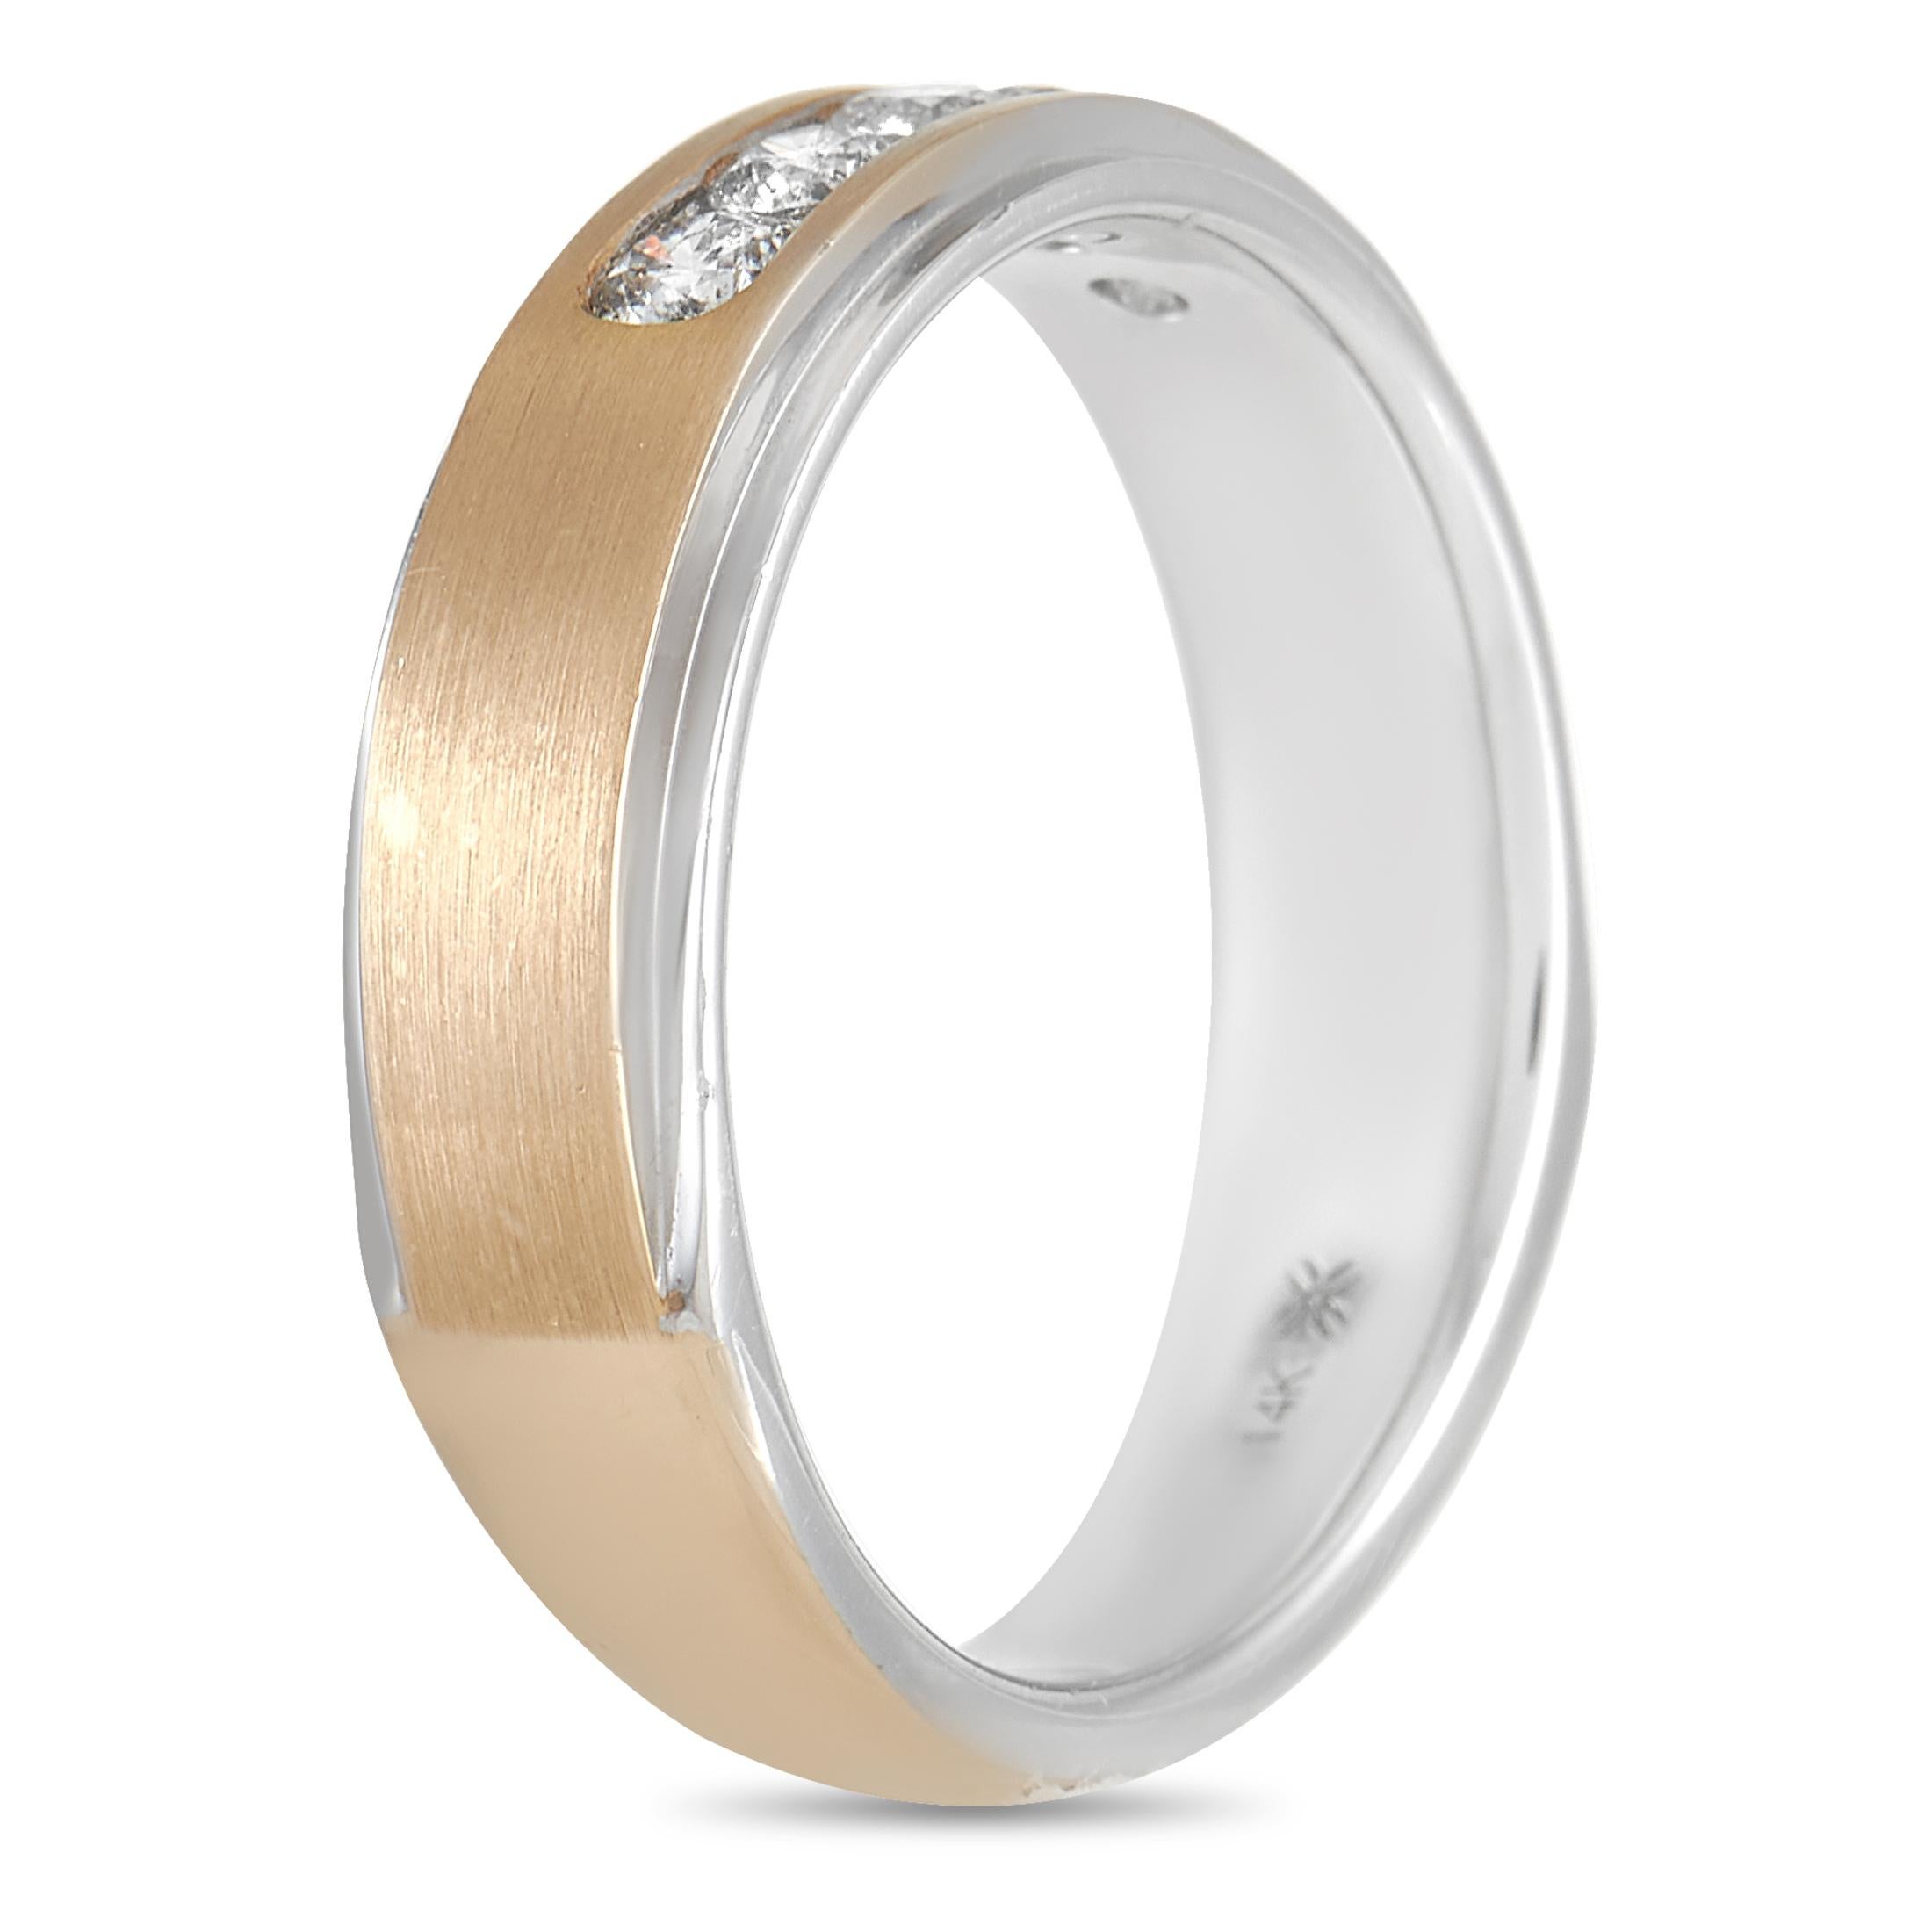 An 14K White Gold base provides the perfect foundation for the rest of this band ring’s dynamic details. It’s encircled by a second band of 14K Rose Gold and is accented in the center by 5 round-cut diamonds totaling 0.50 carats. It measures 6mm